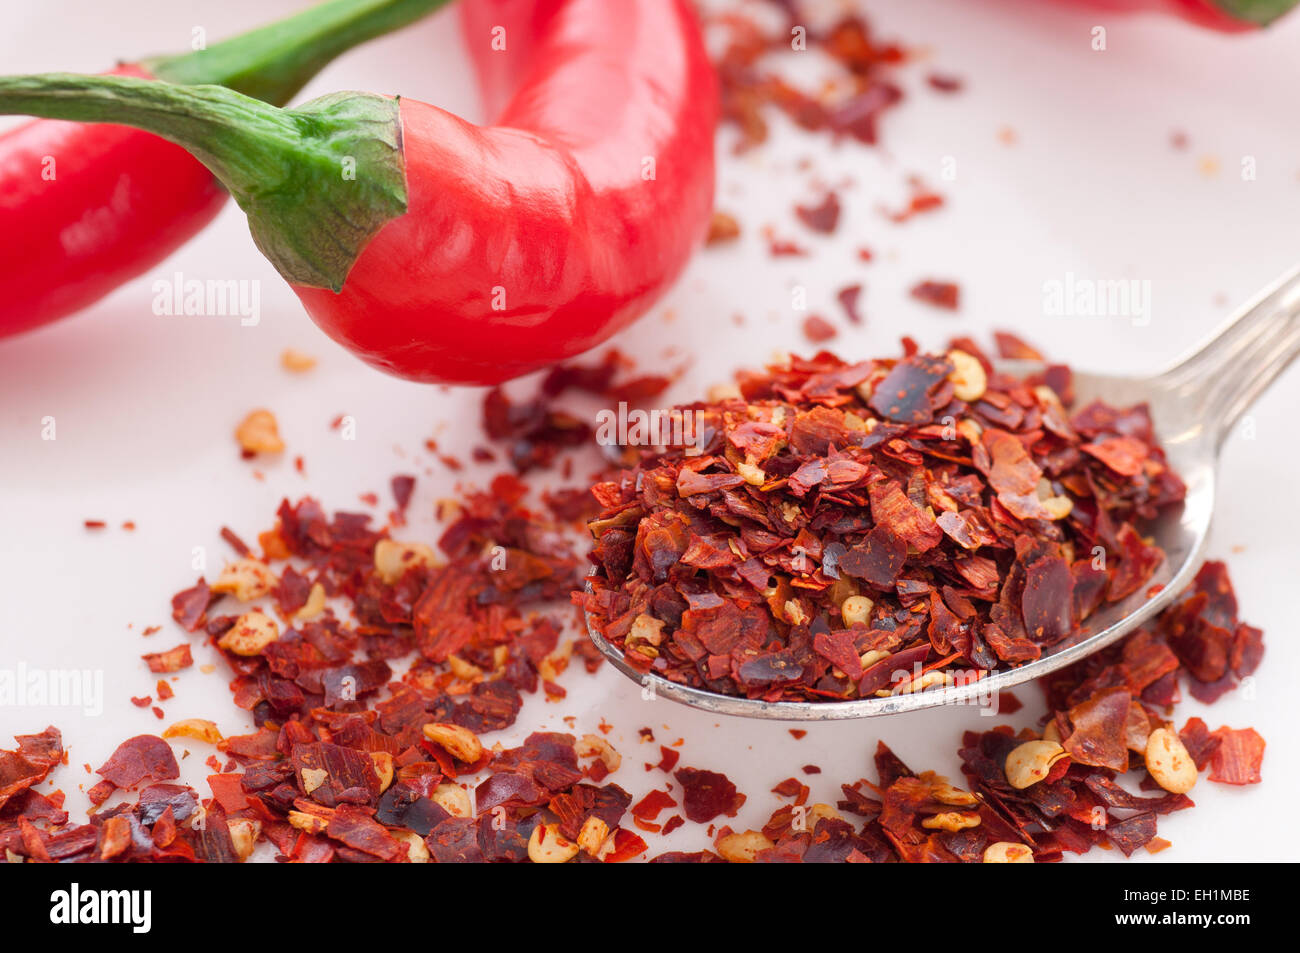 Spoon with red chili pepper flakes. Stock Photo